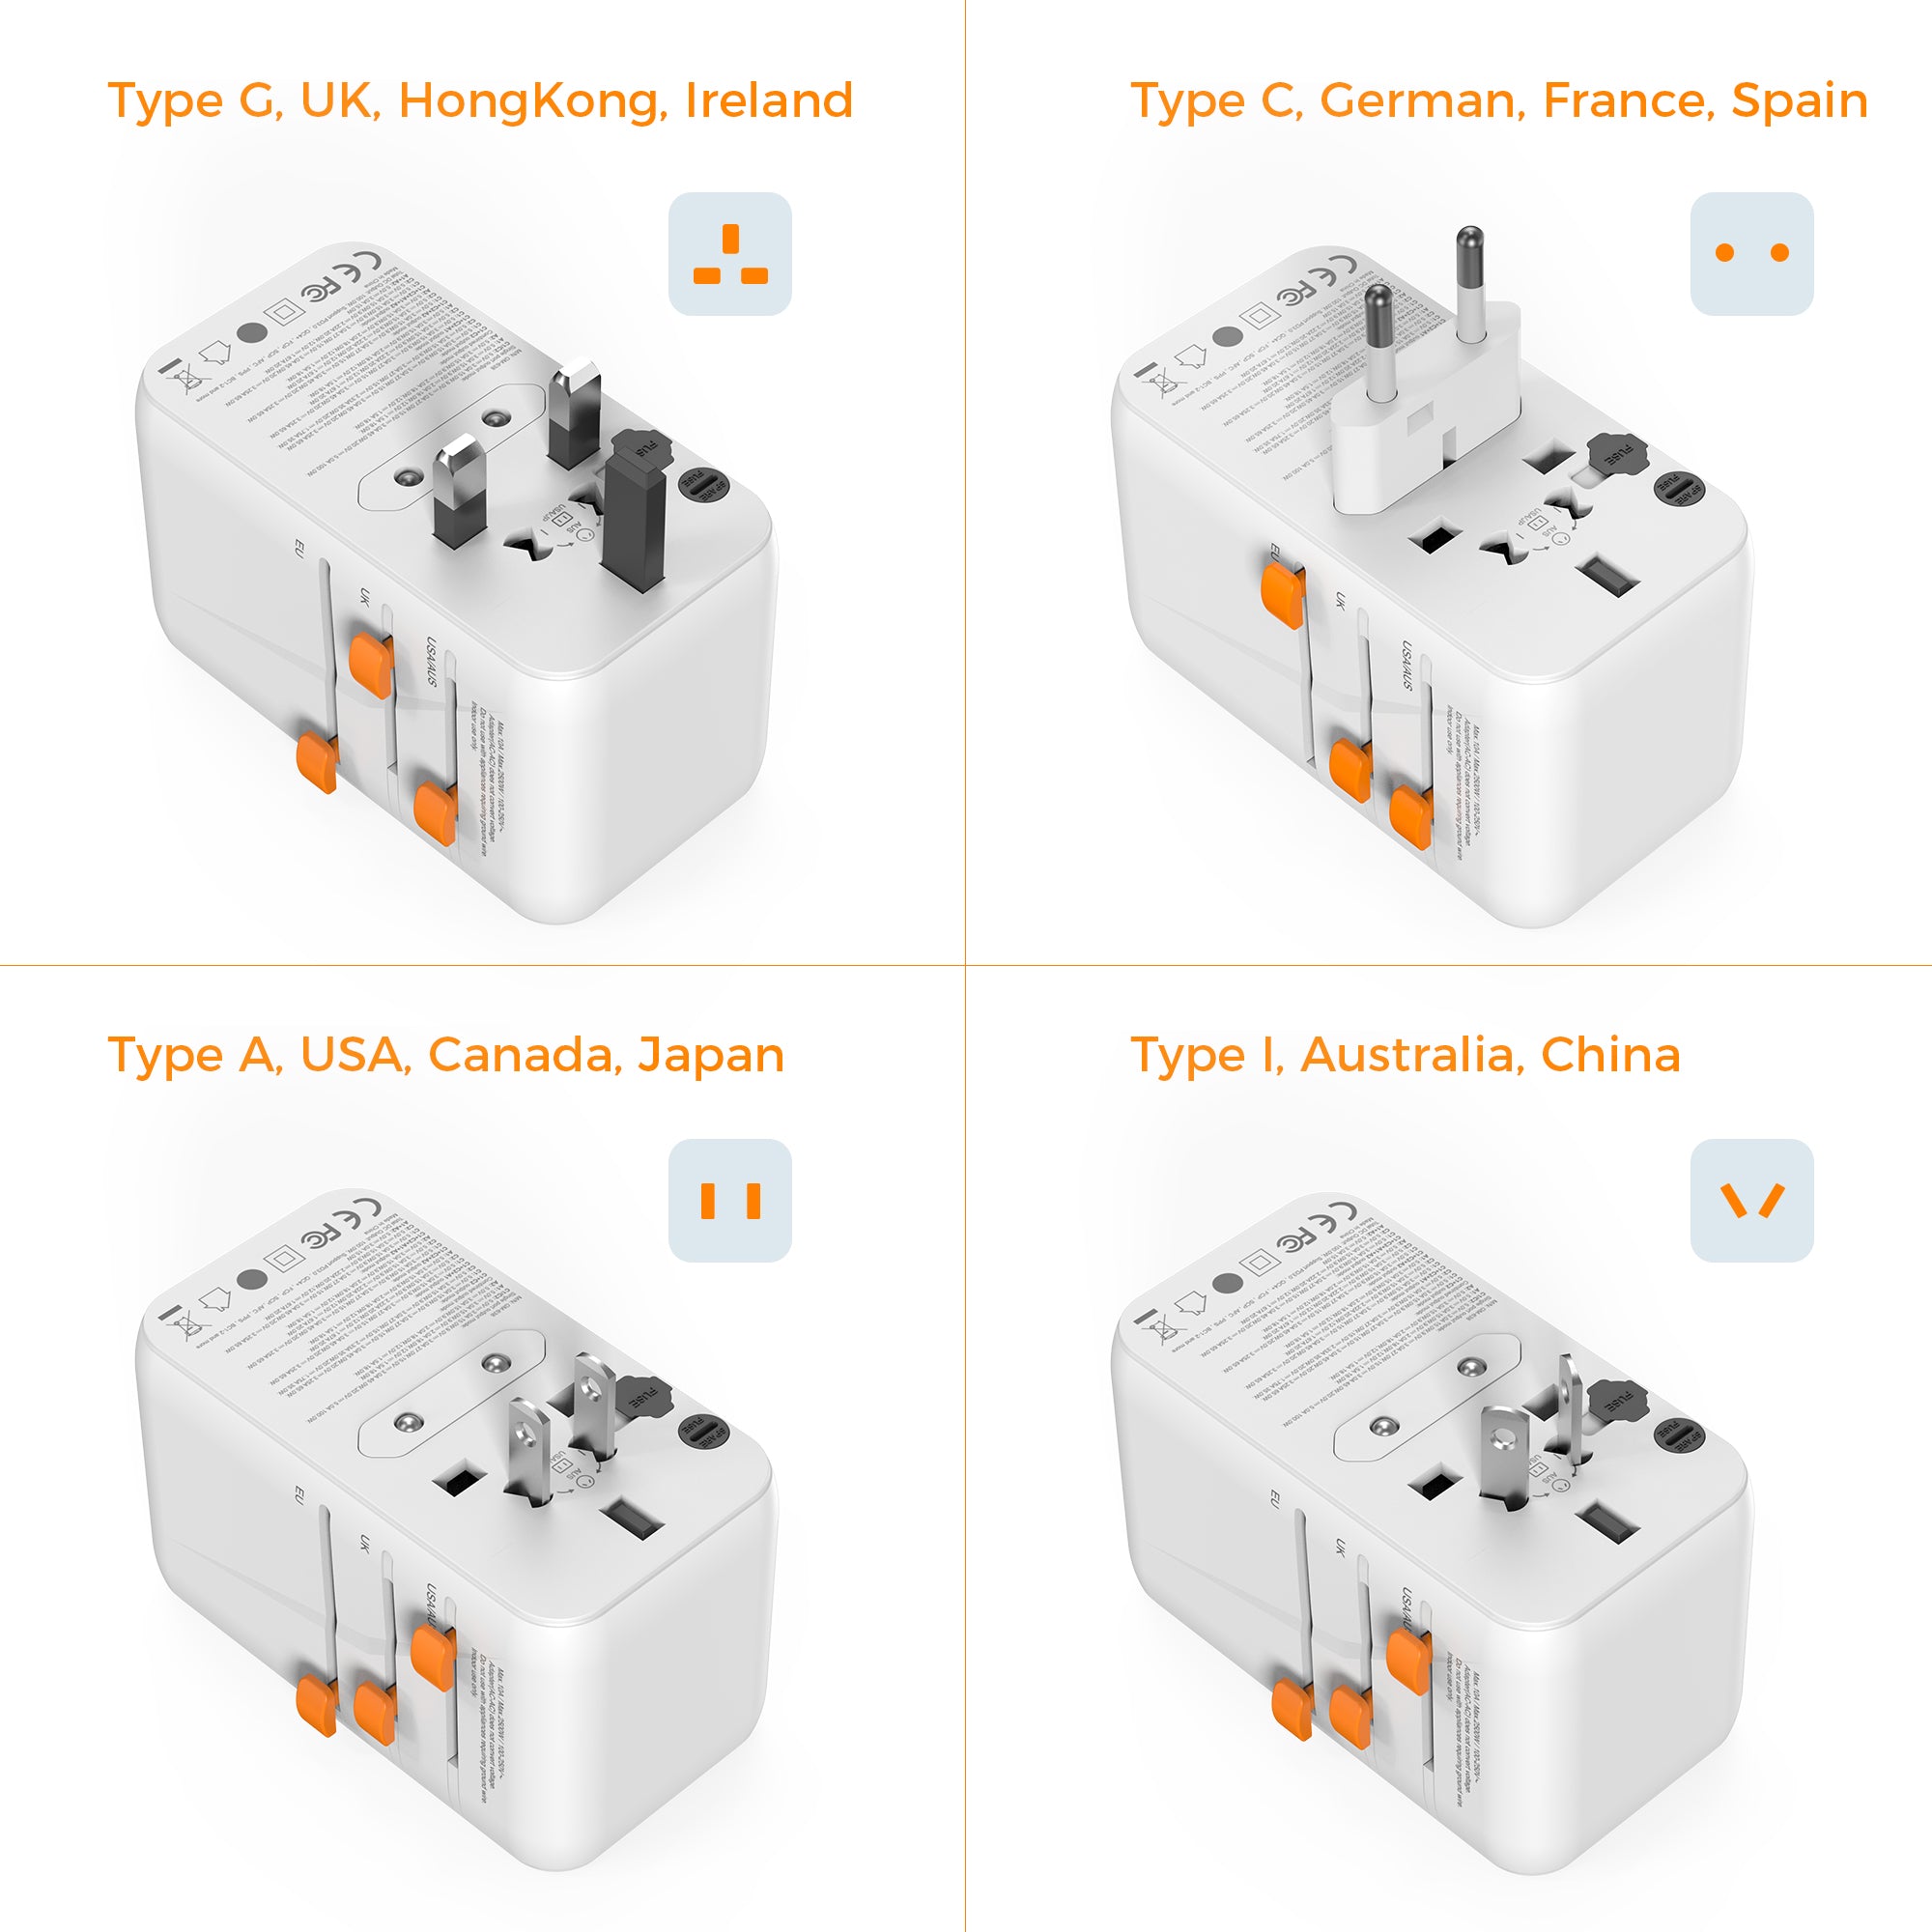 International 5 In 1 Travel Plug Adaptor with 2 USB C and 2 USB Ports (Fast Charging PD 100W)